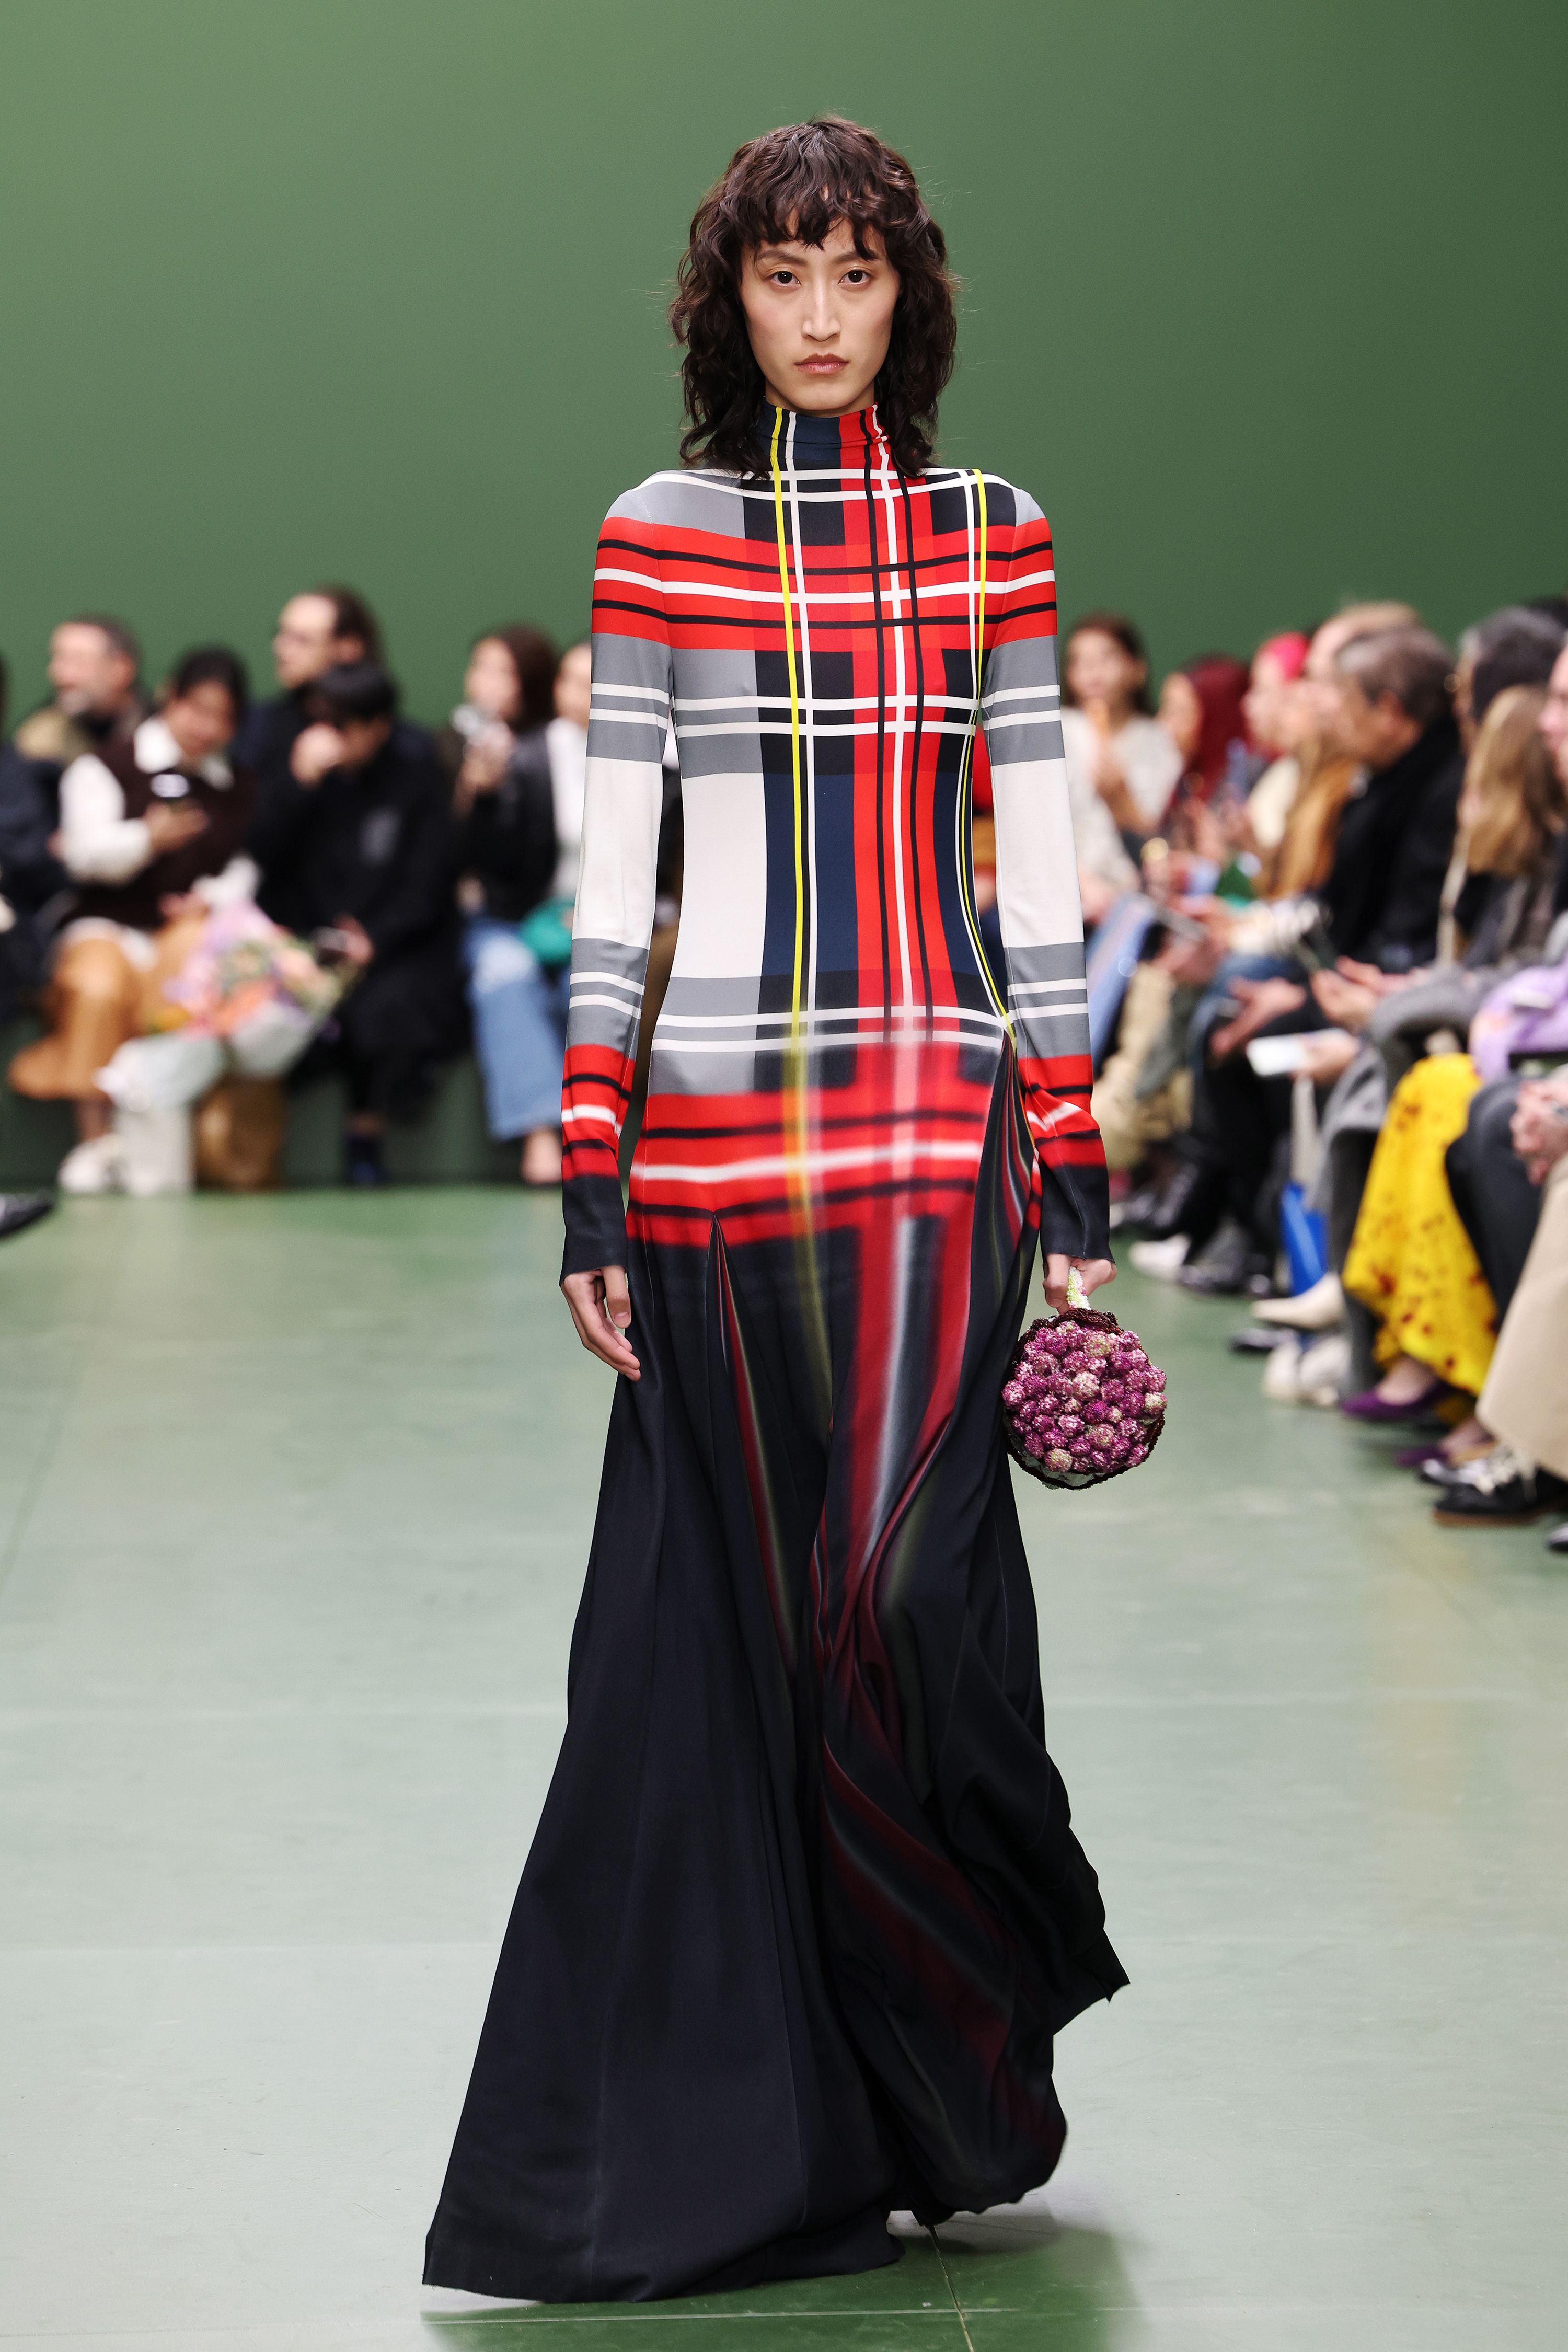 Traditional prints like tartan took on a new form at Loewe.